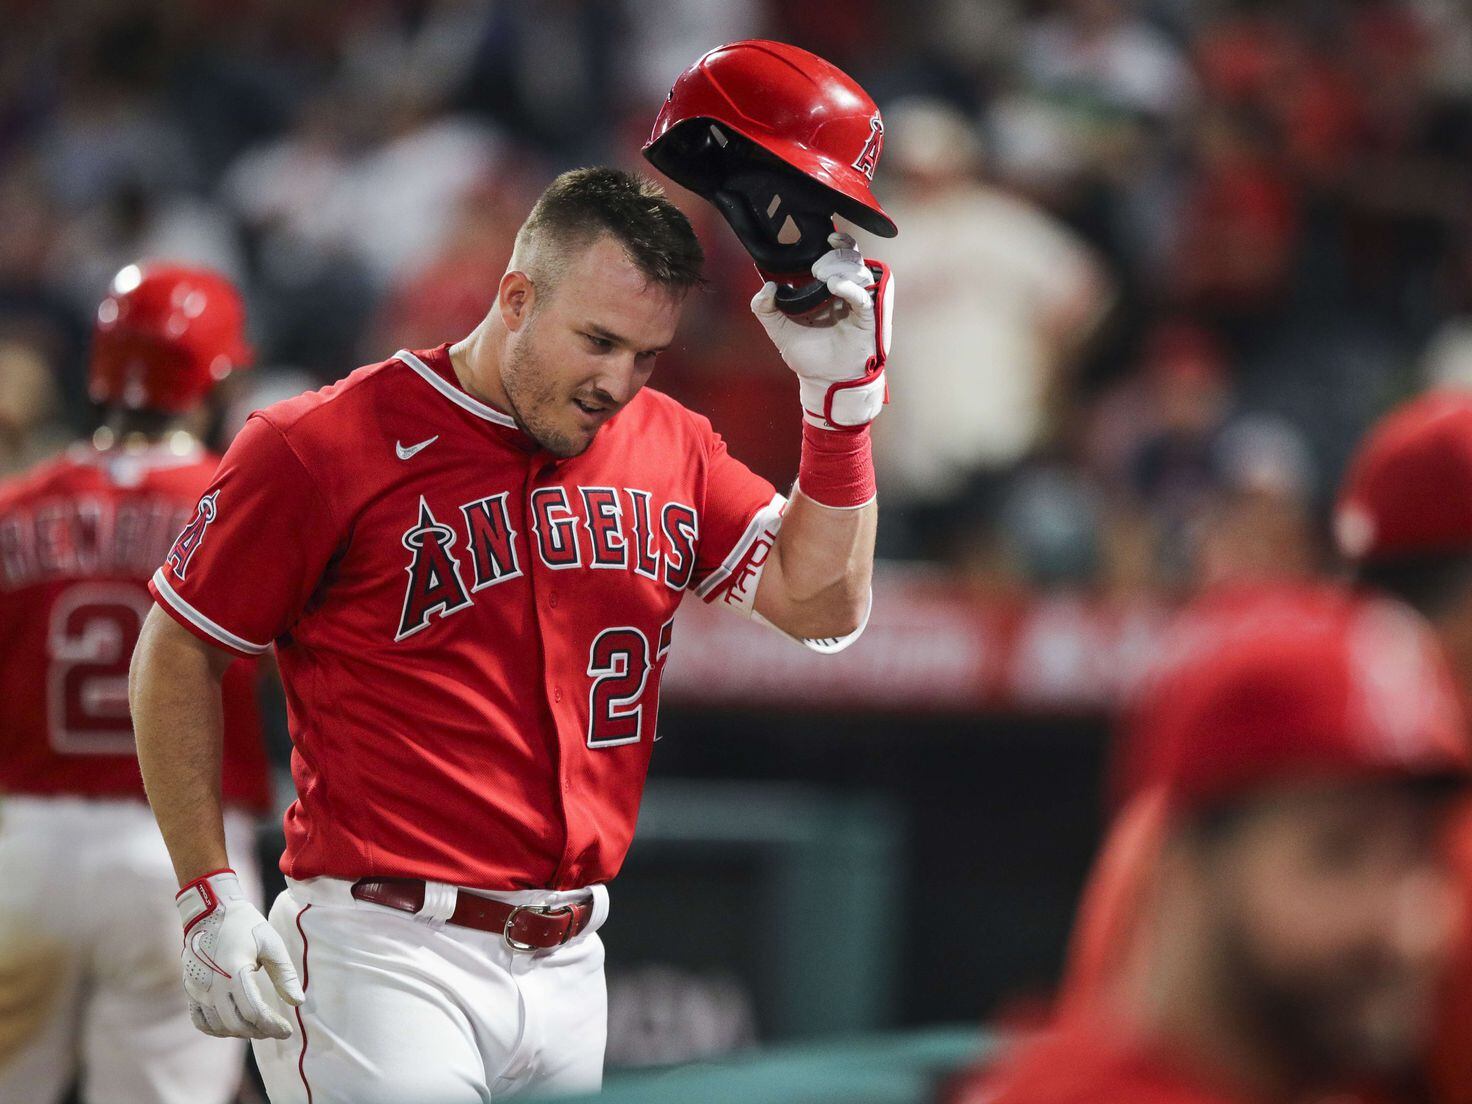 A Home Run Streak Highlights Mike Trout's Up-and-Down Season